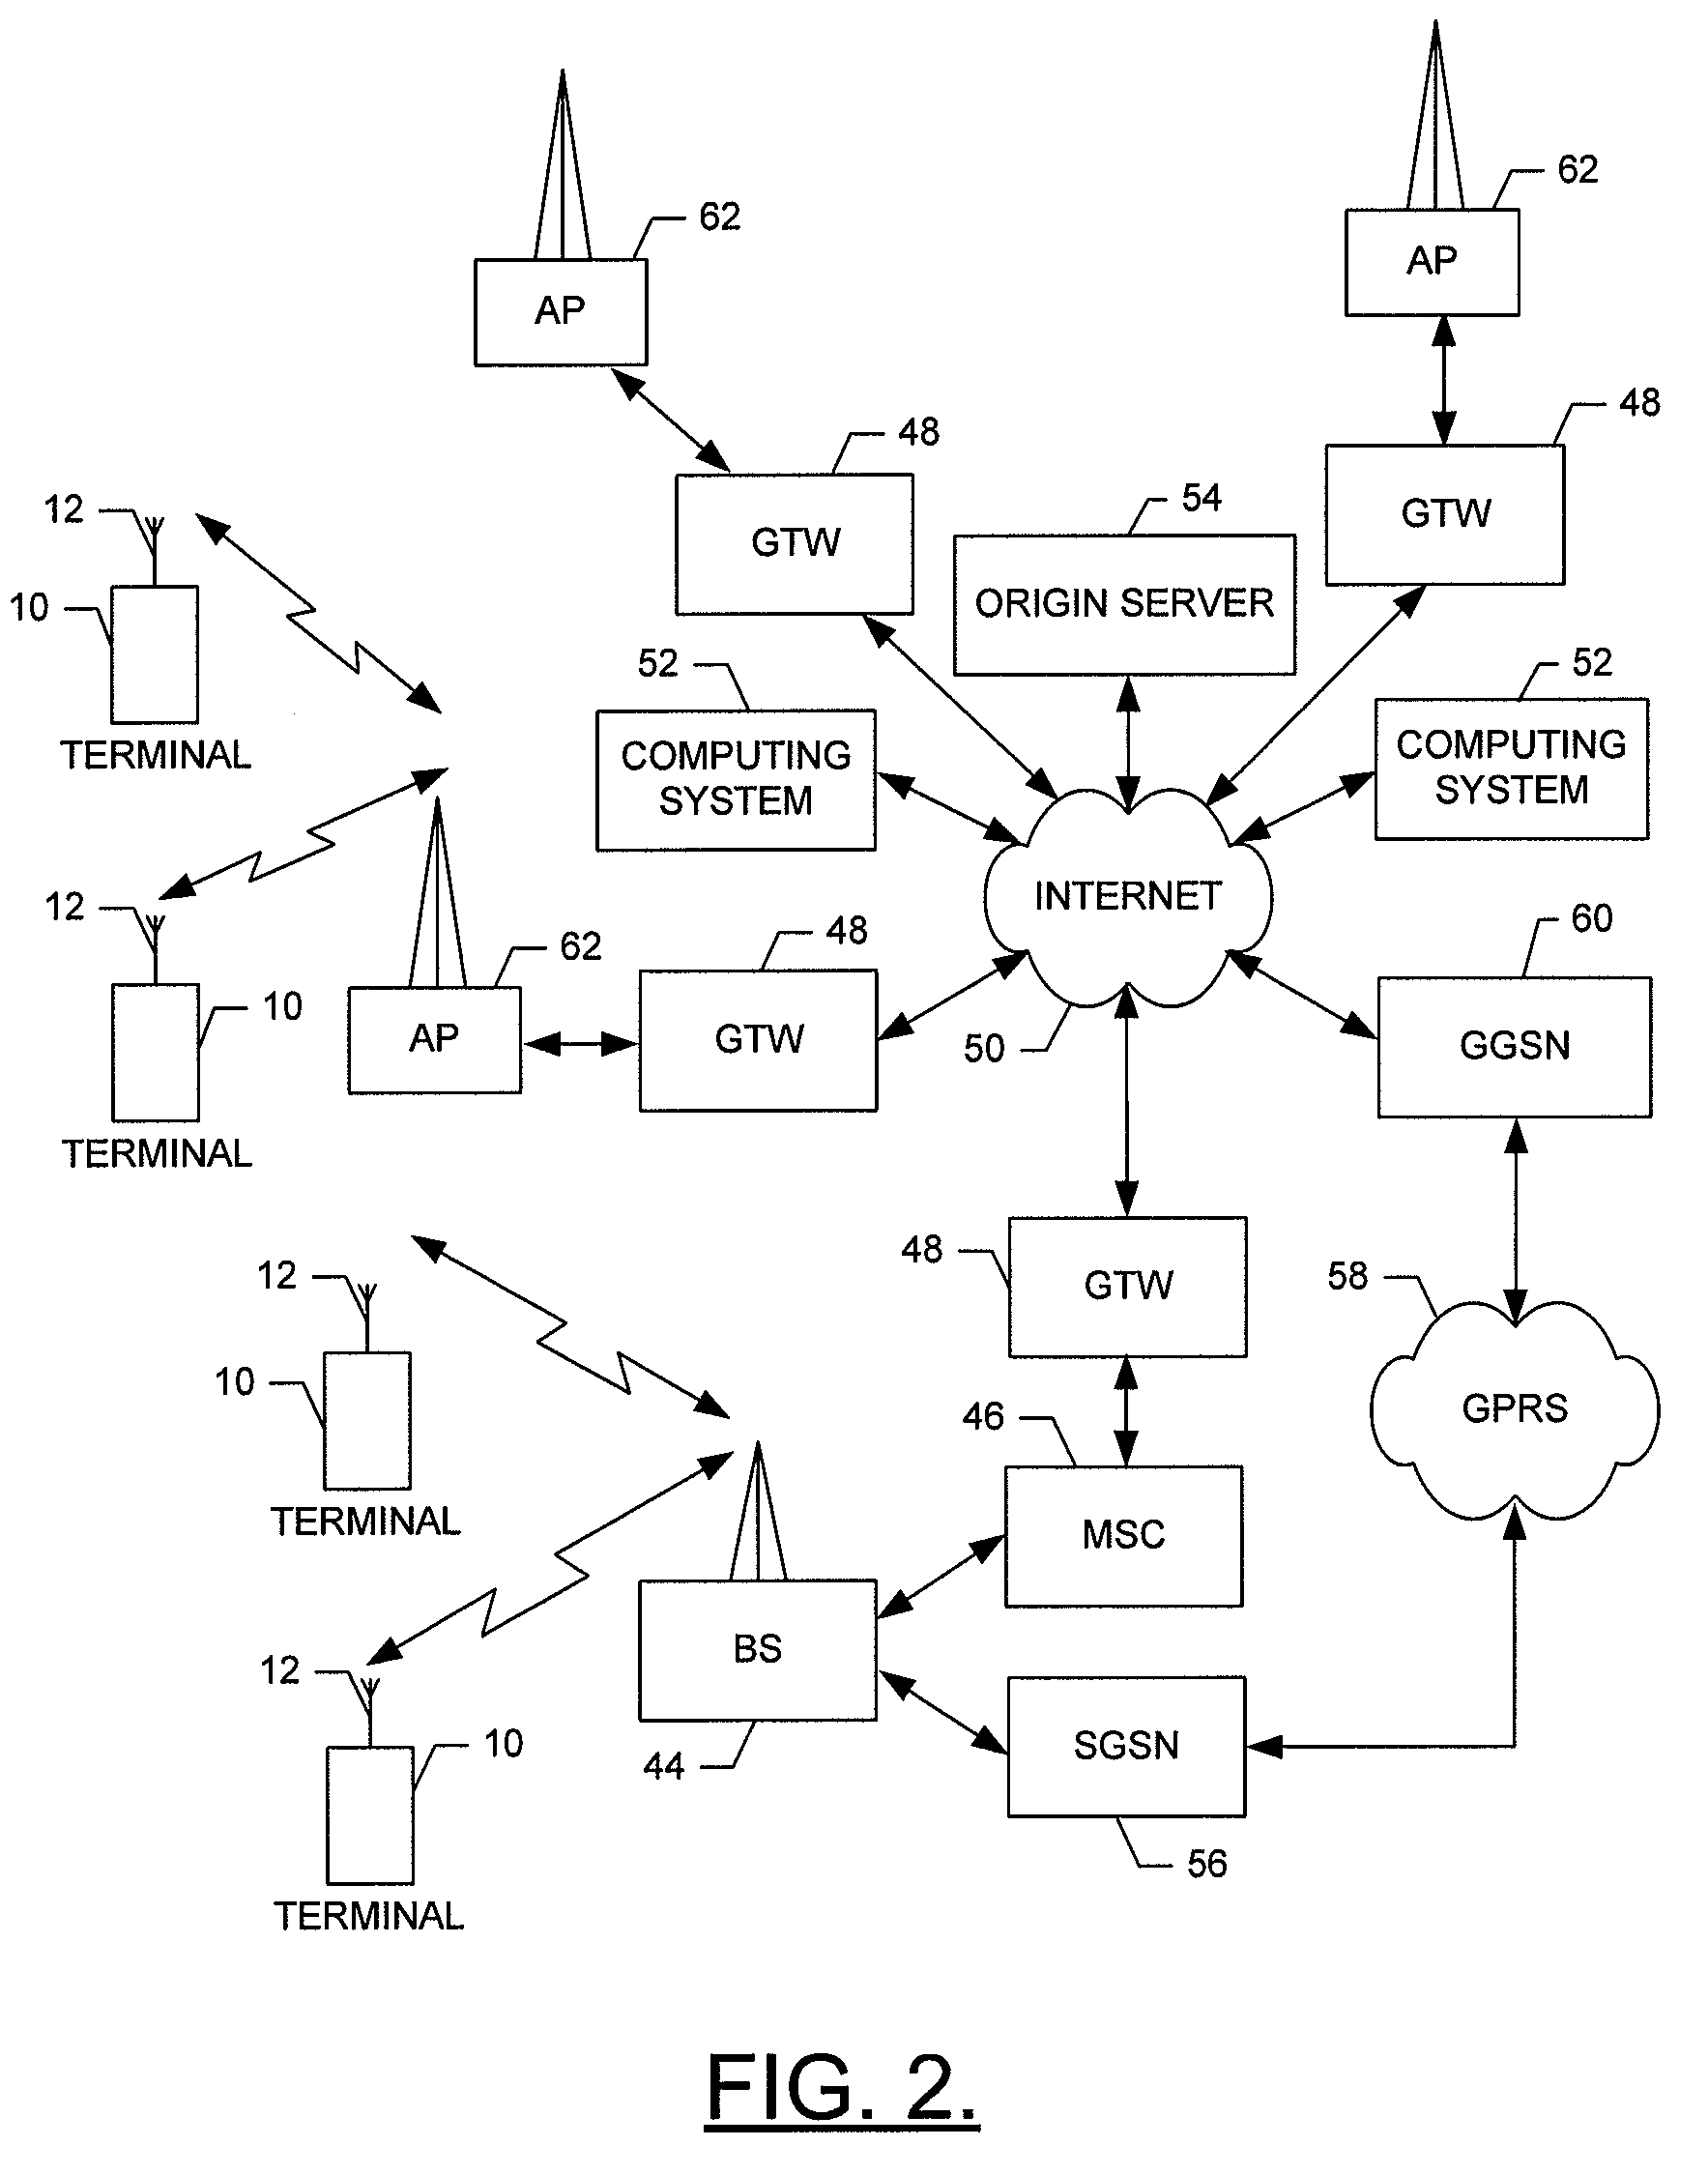 Method, apparatus and computer program product for providing flexible text based language identification